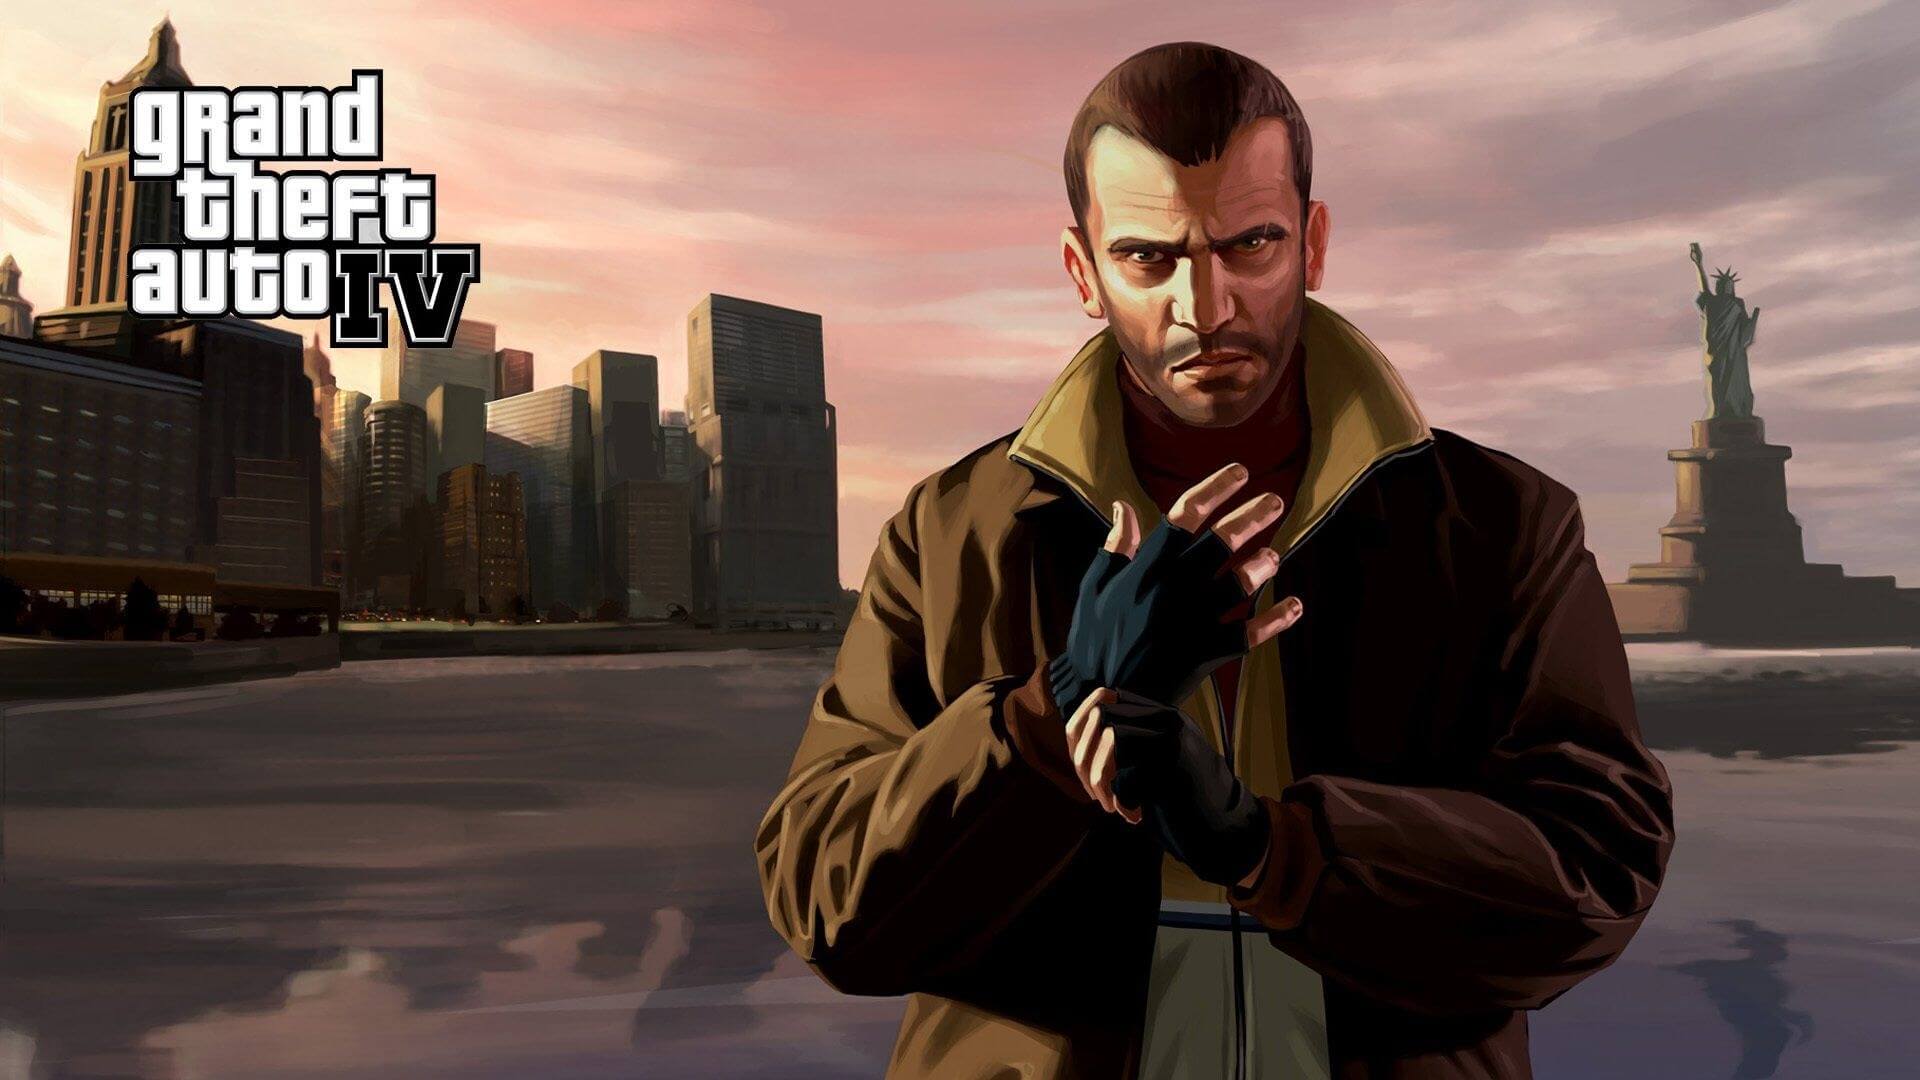 Rockstar will return GTA IV to Steam in March after removing Games for Windows Live code